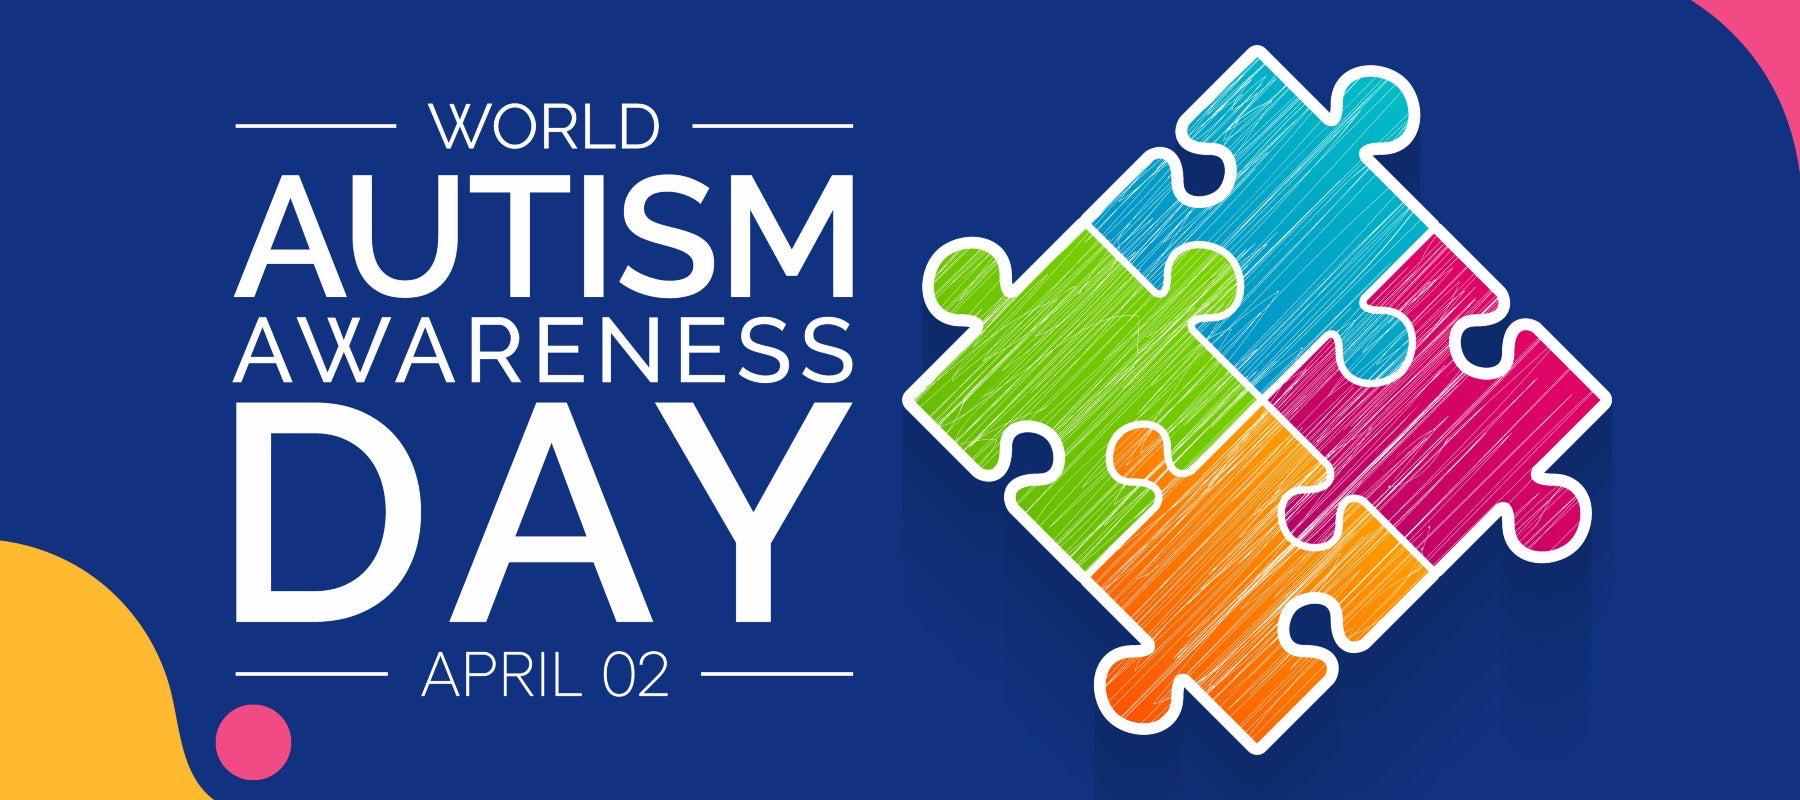 It’s 2023 world autism awareness day